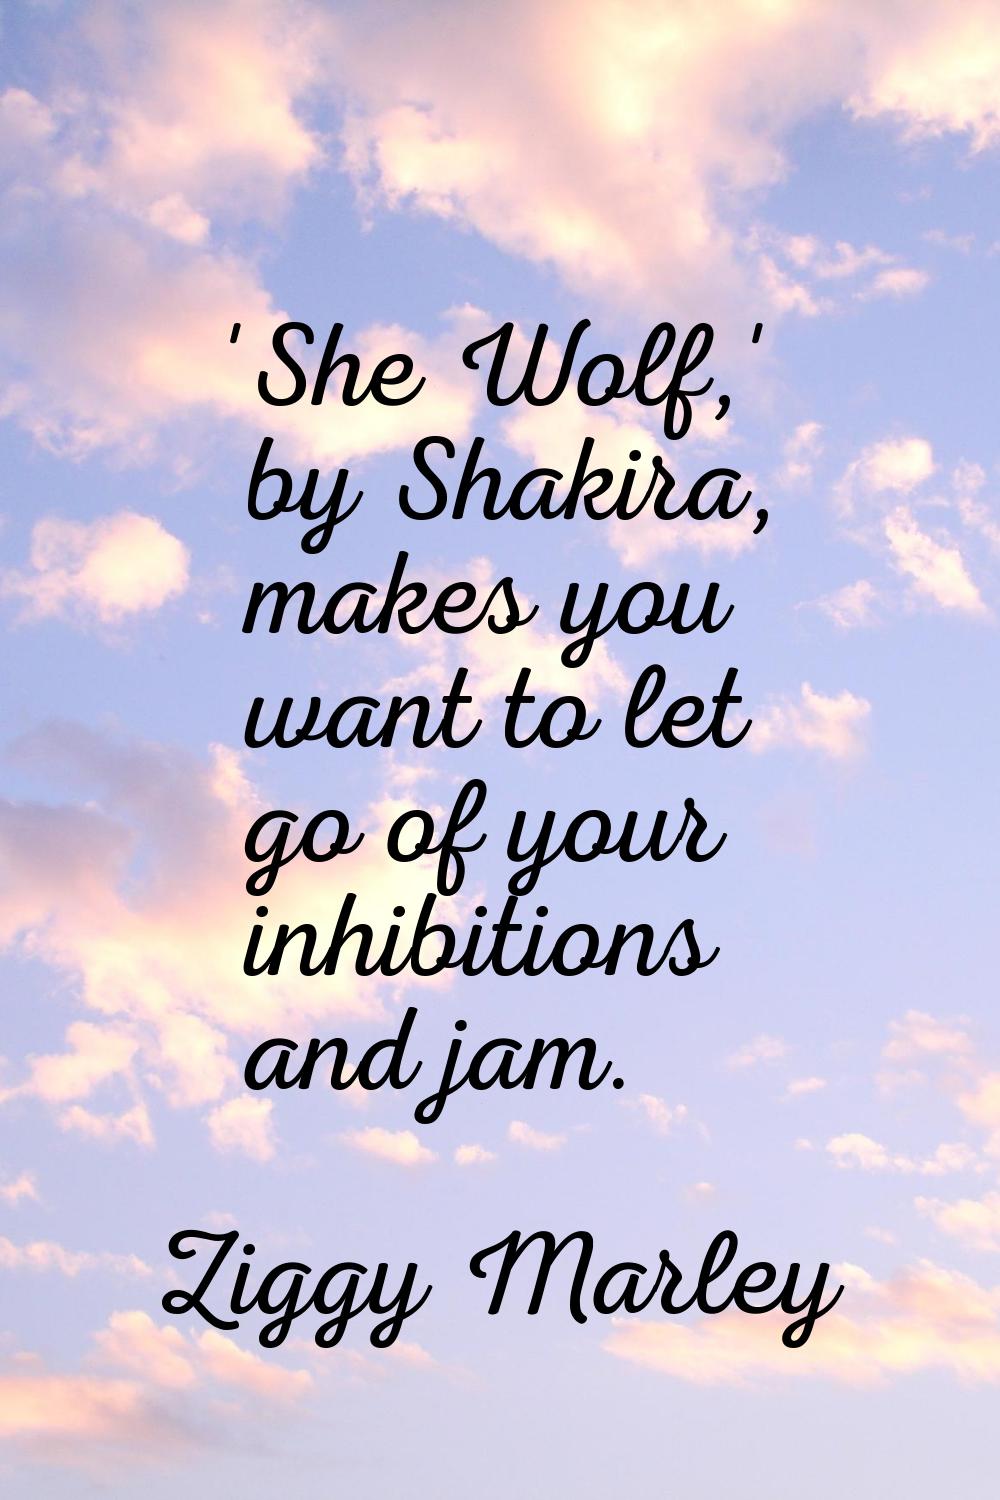 'She Wolf,' by Shakira, makes you want to let go of your inhibitions and jam.